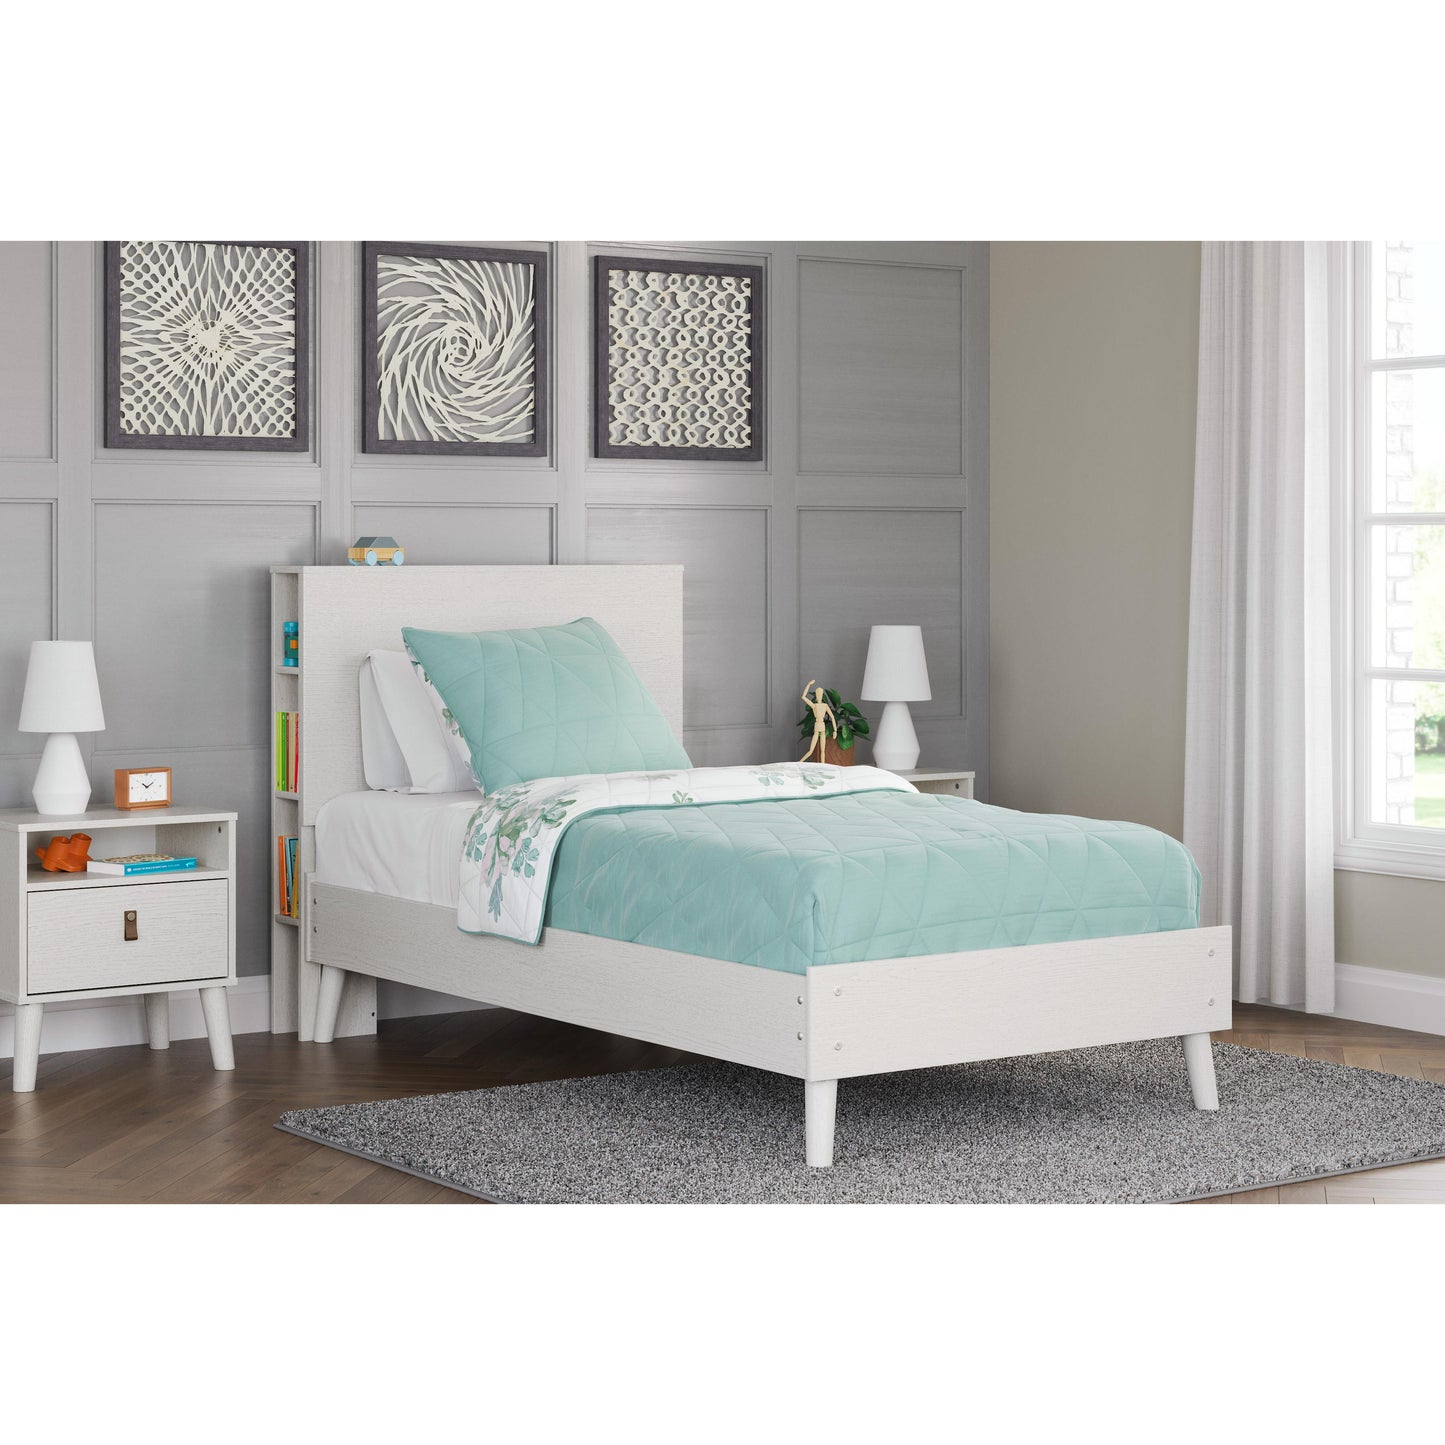 Signature Design by Ashley Kids Beds Bed EB1024-163/EB1024-111 IMAGE 5